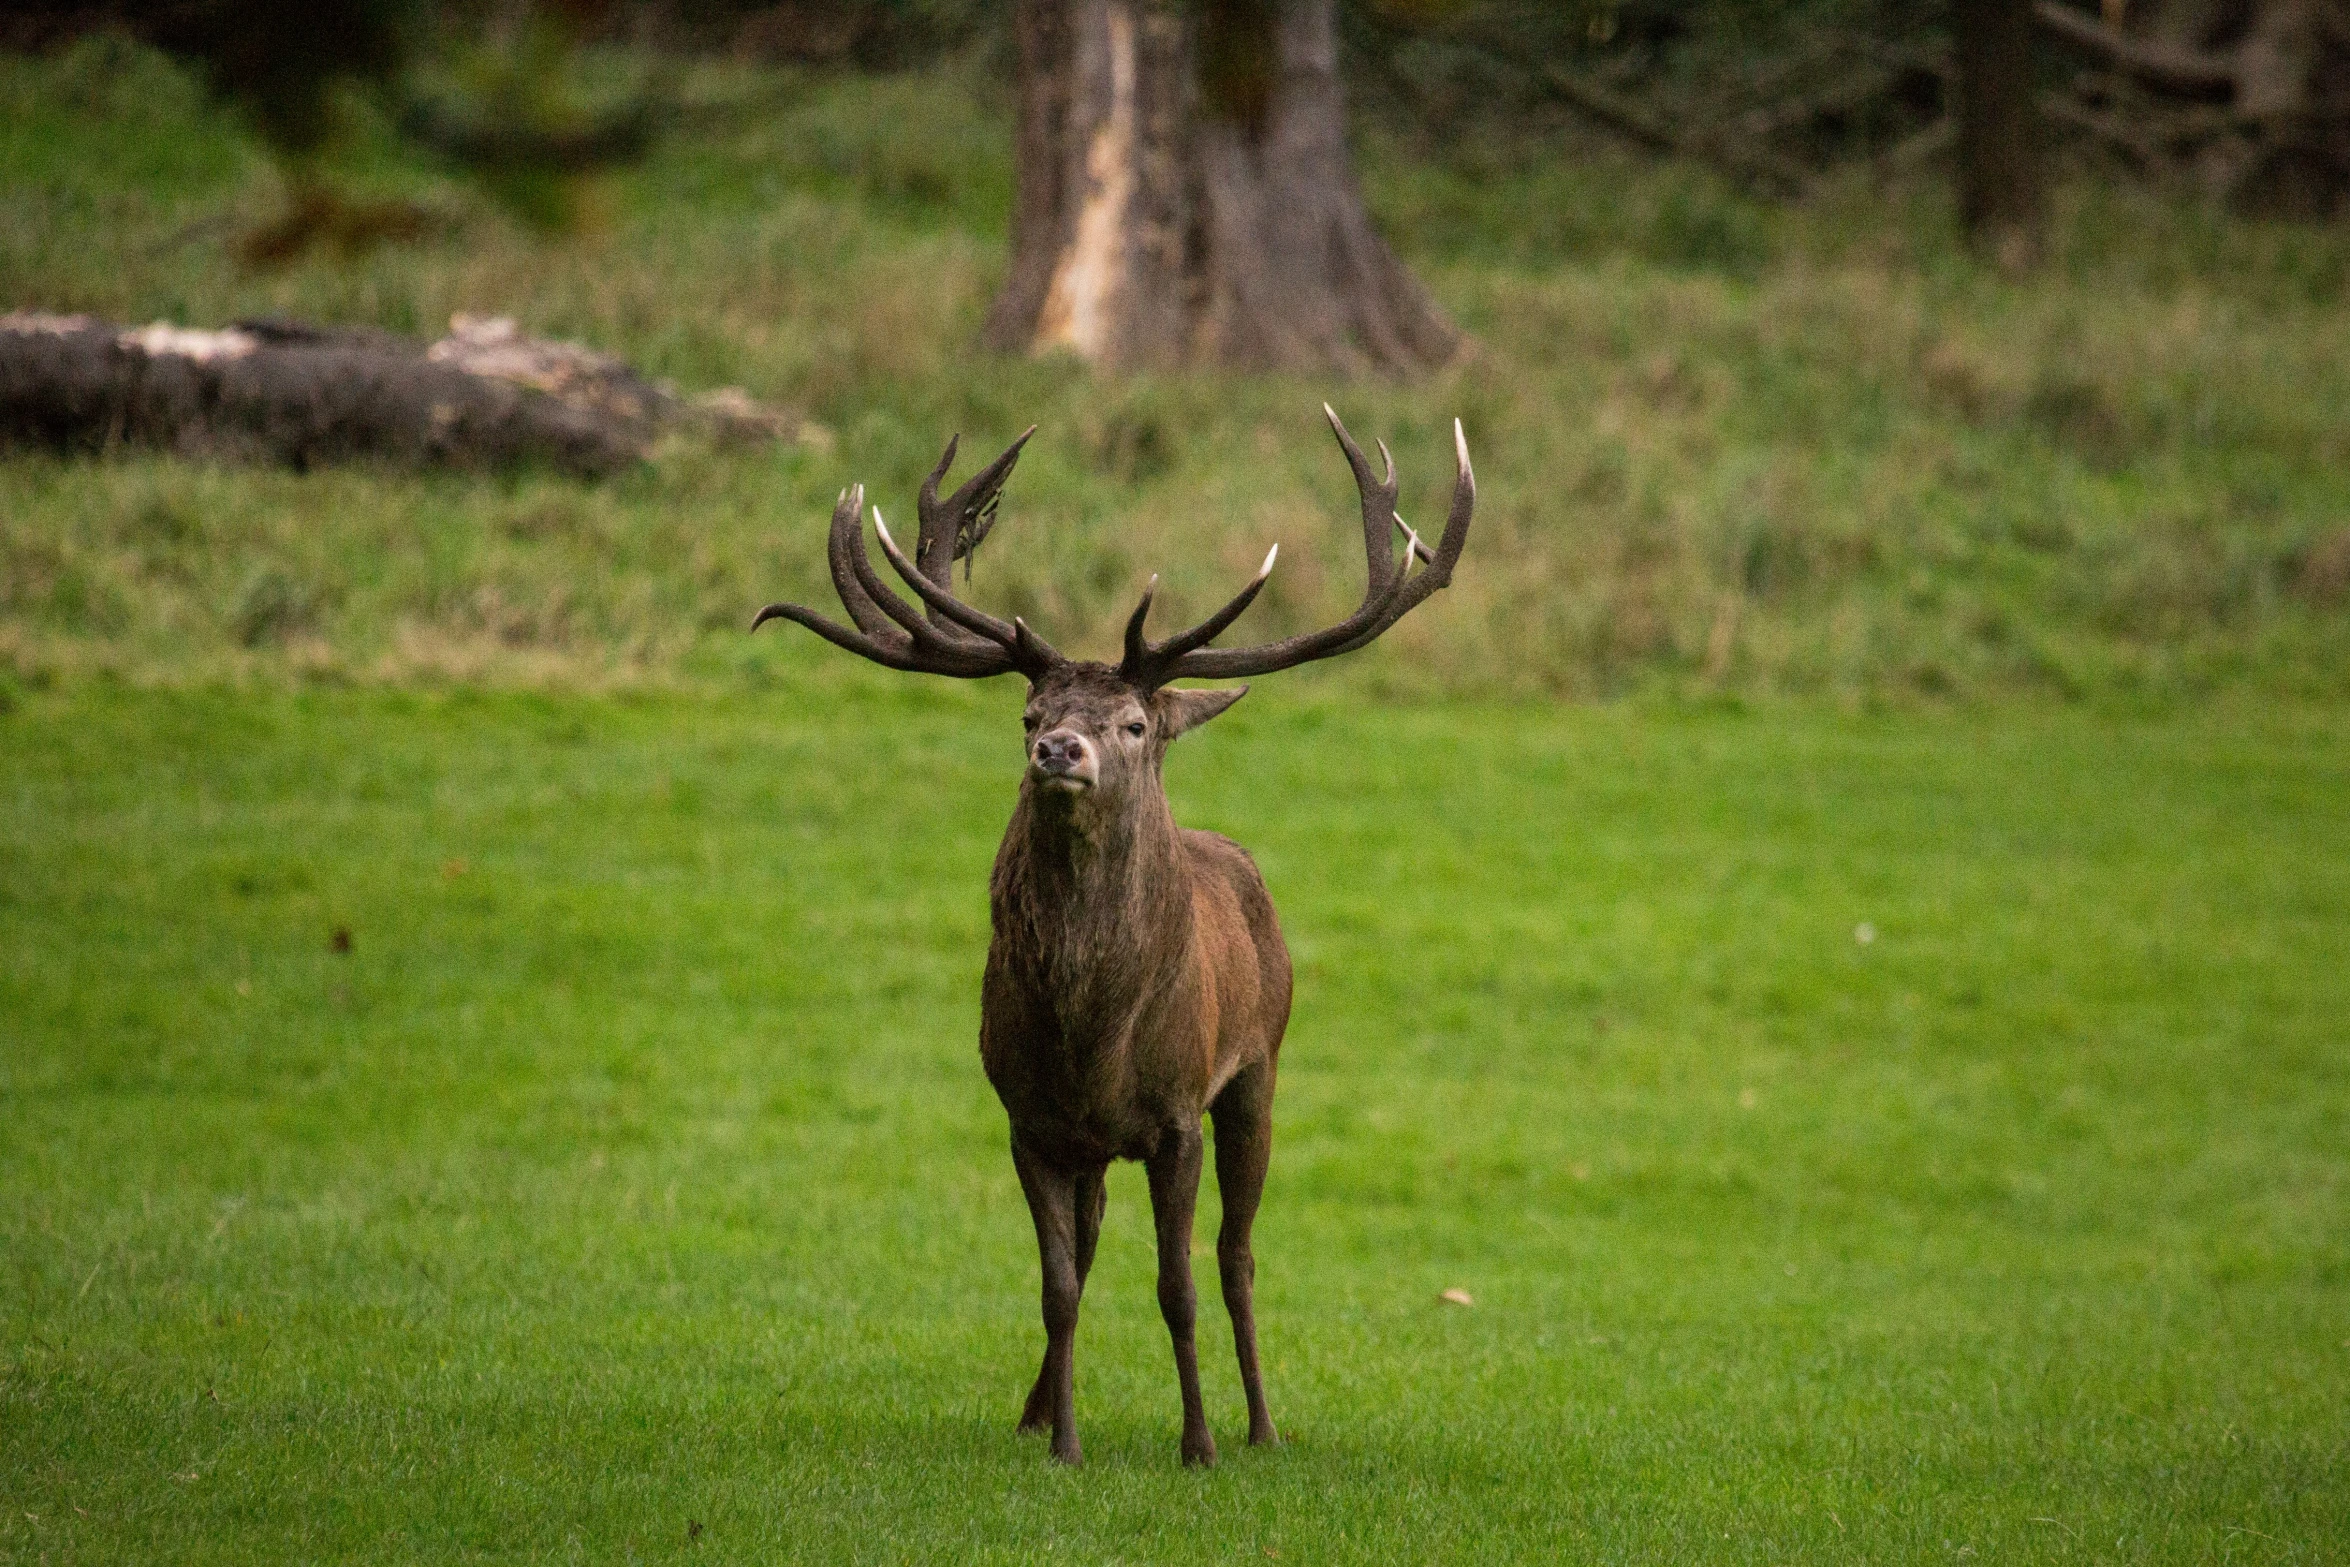 a deer stands alone on the grass looking back